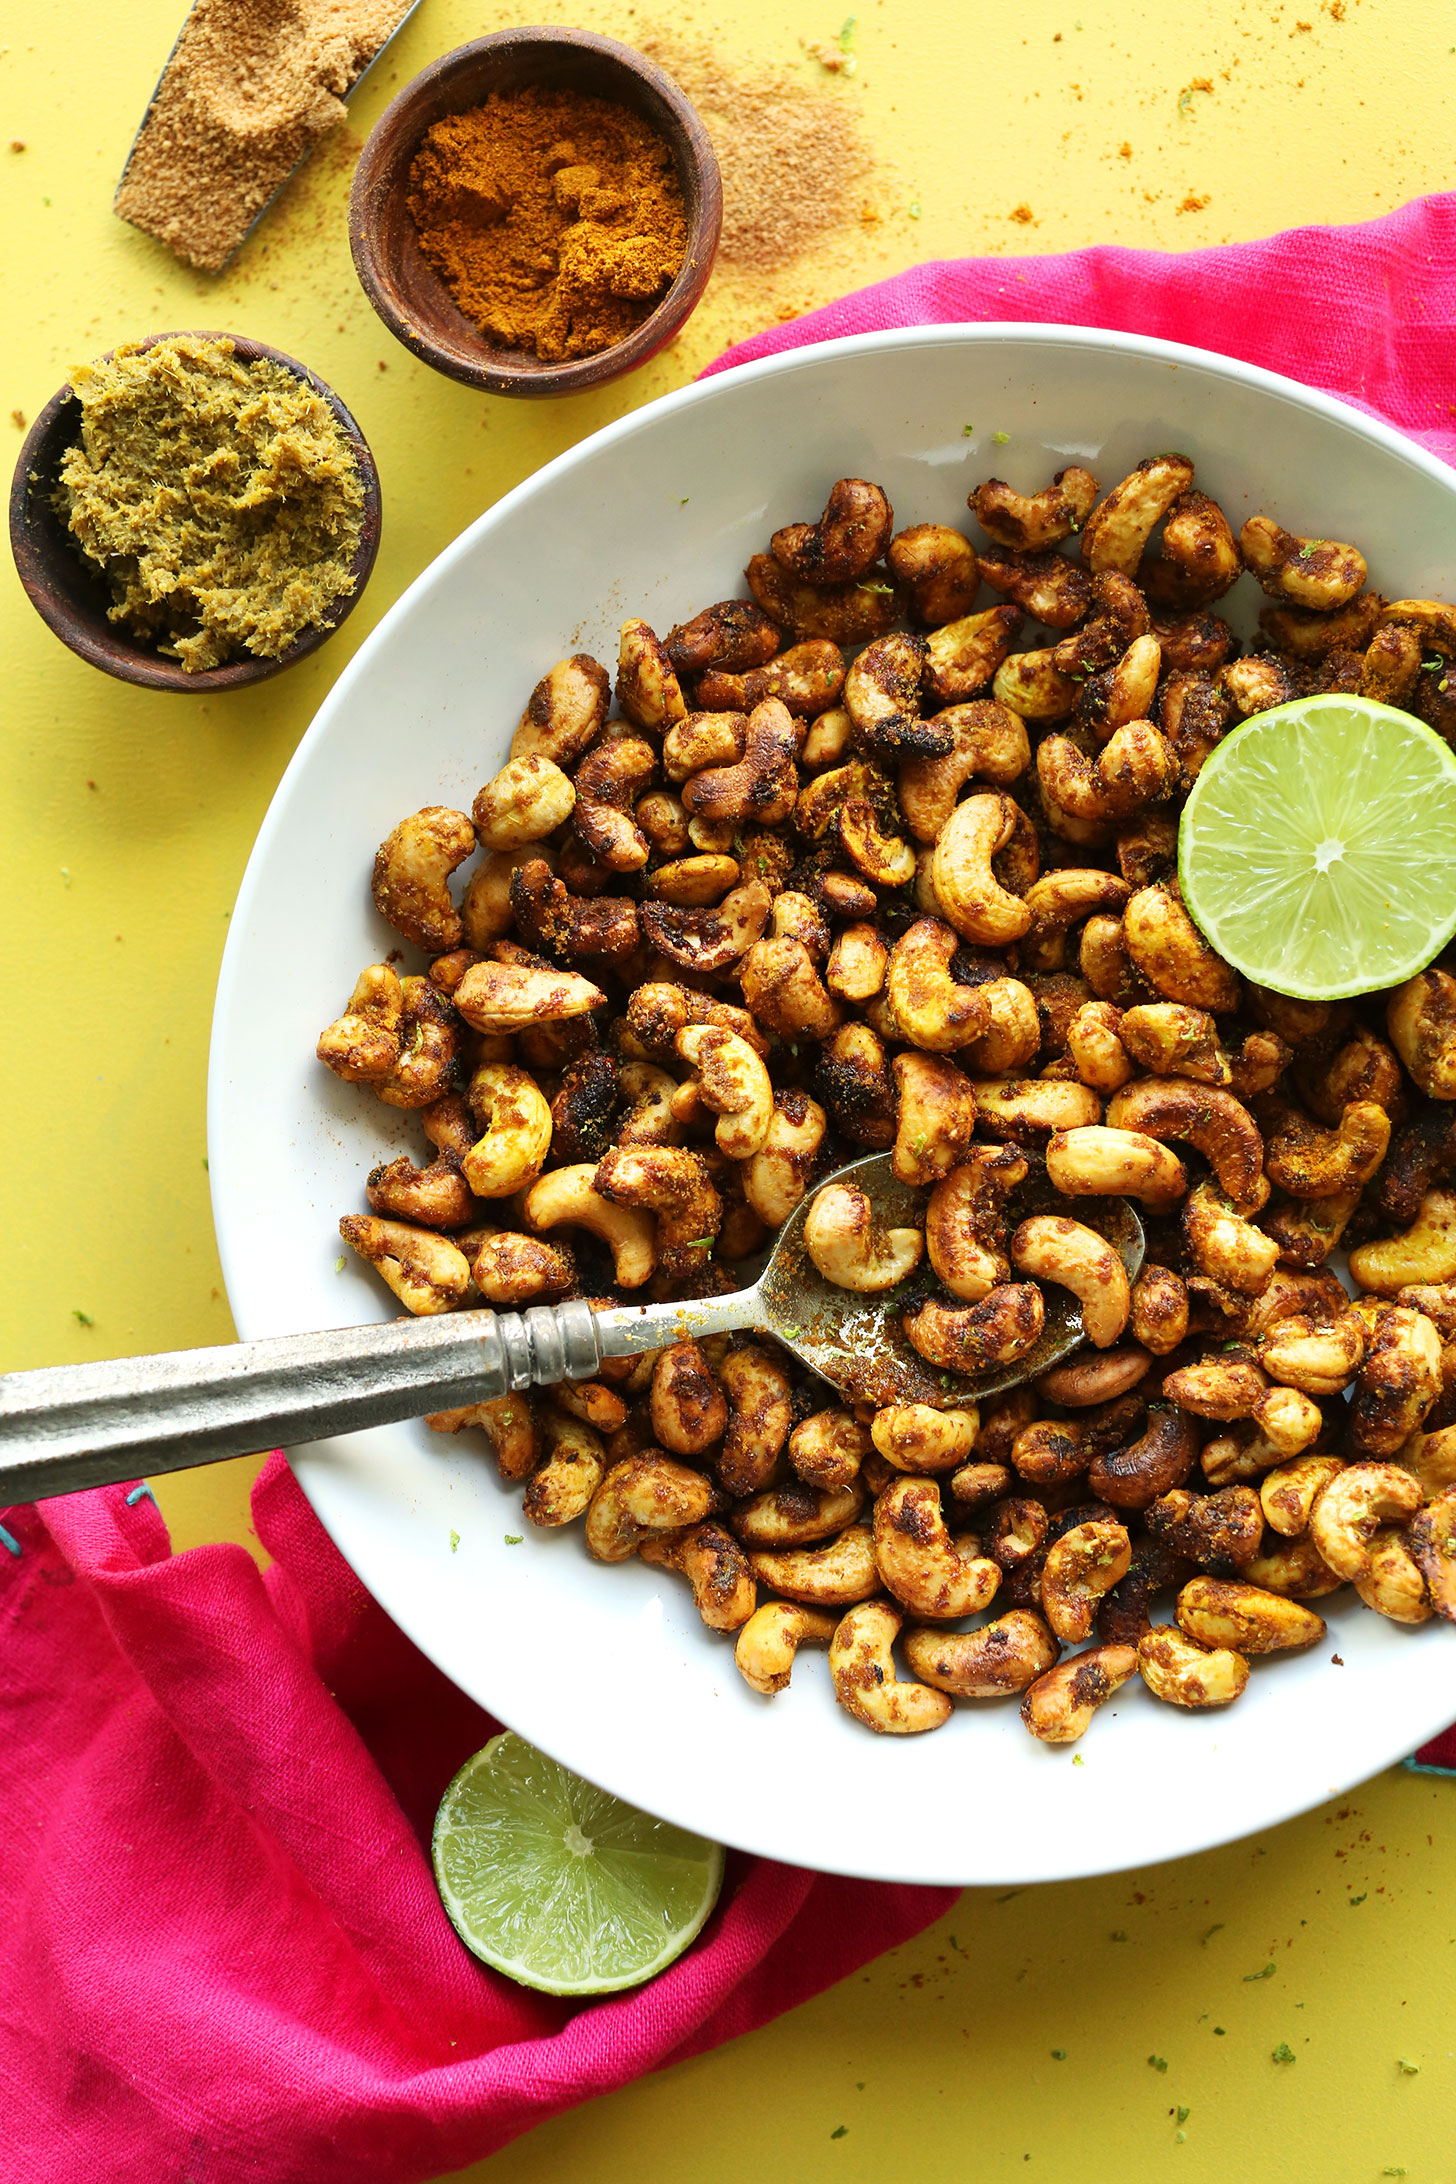 A spoon resting in a bowl of delicious Curry-Spiced Cashews